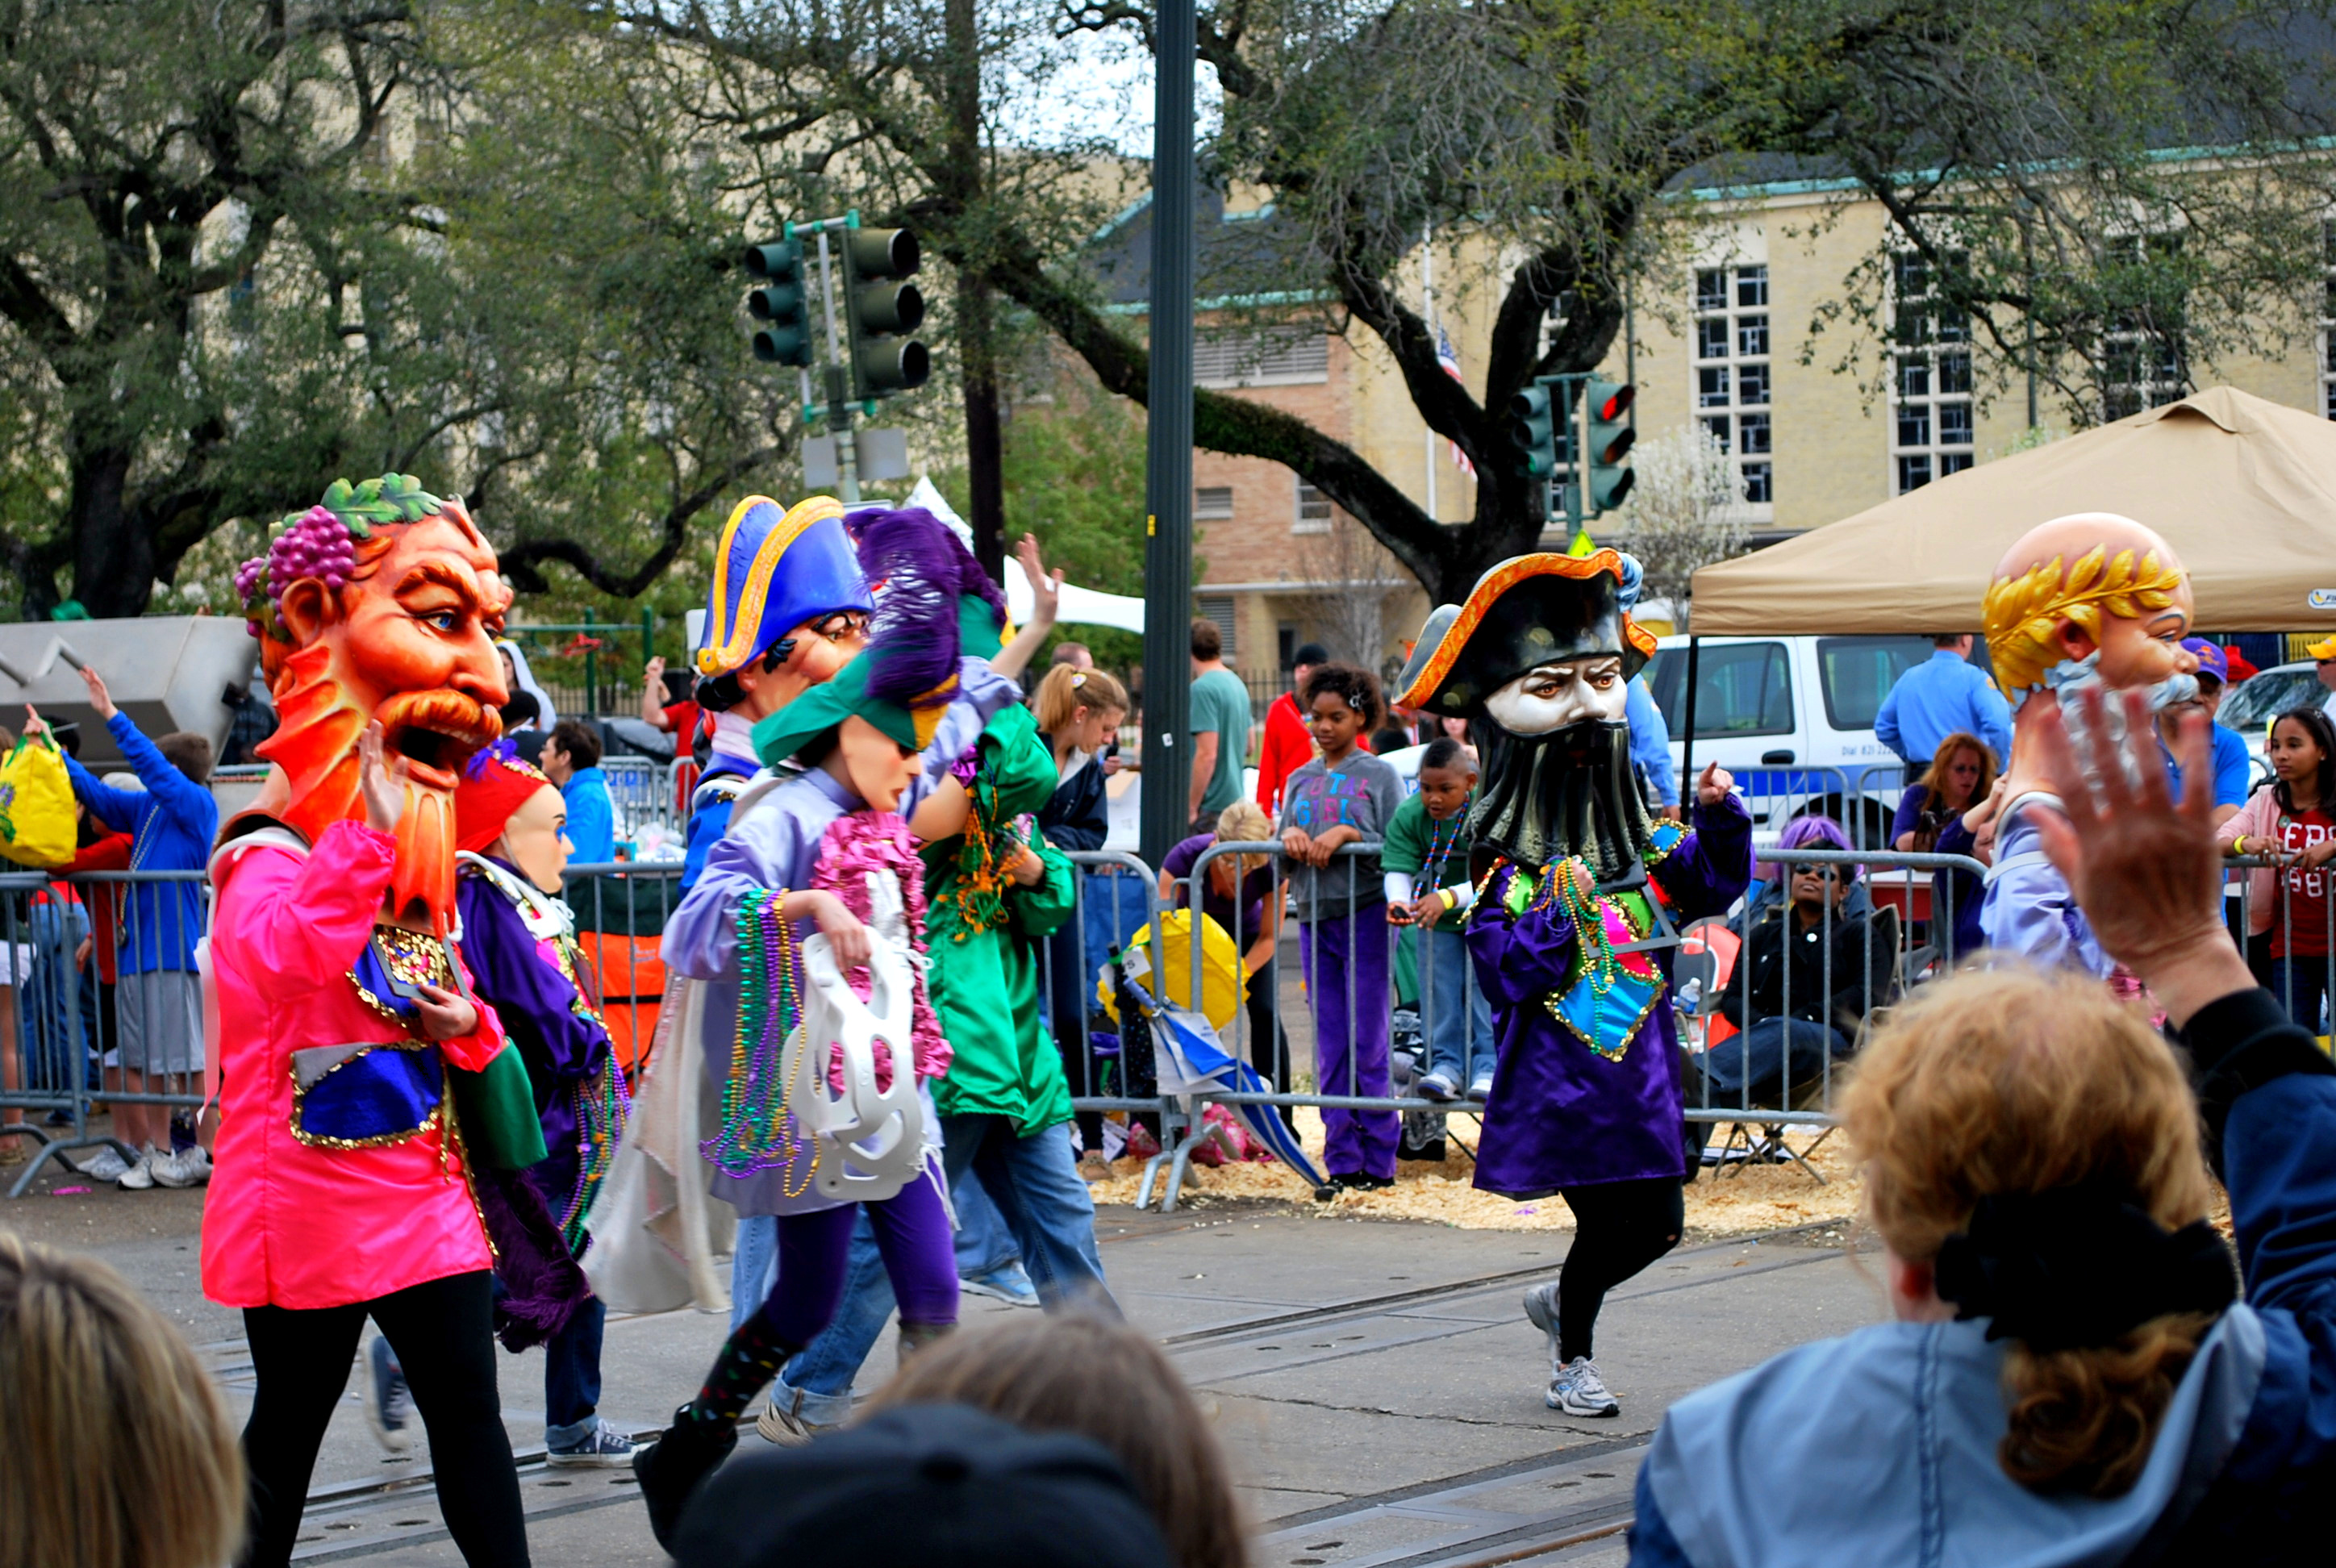 Mardi Gras 2013: Let’s Get This Party Started